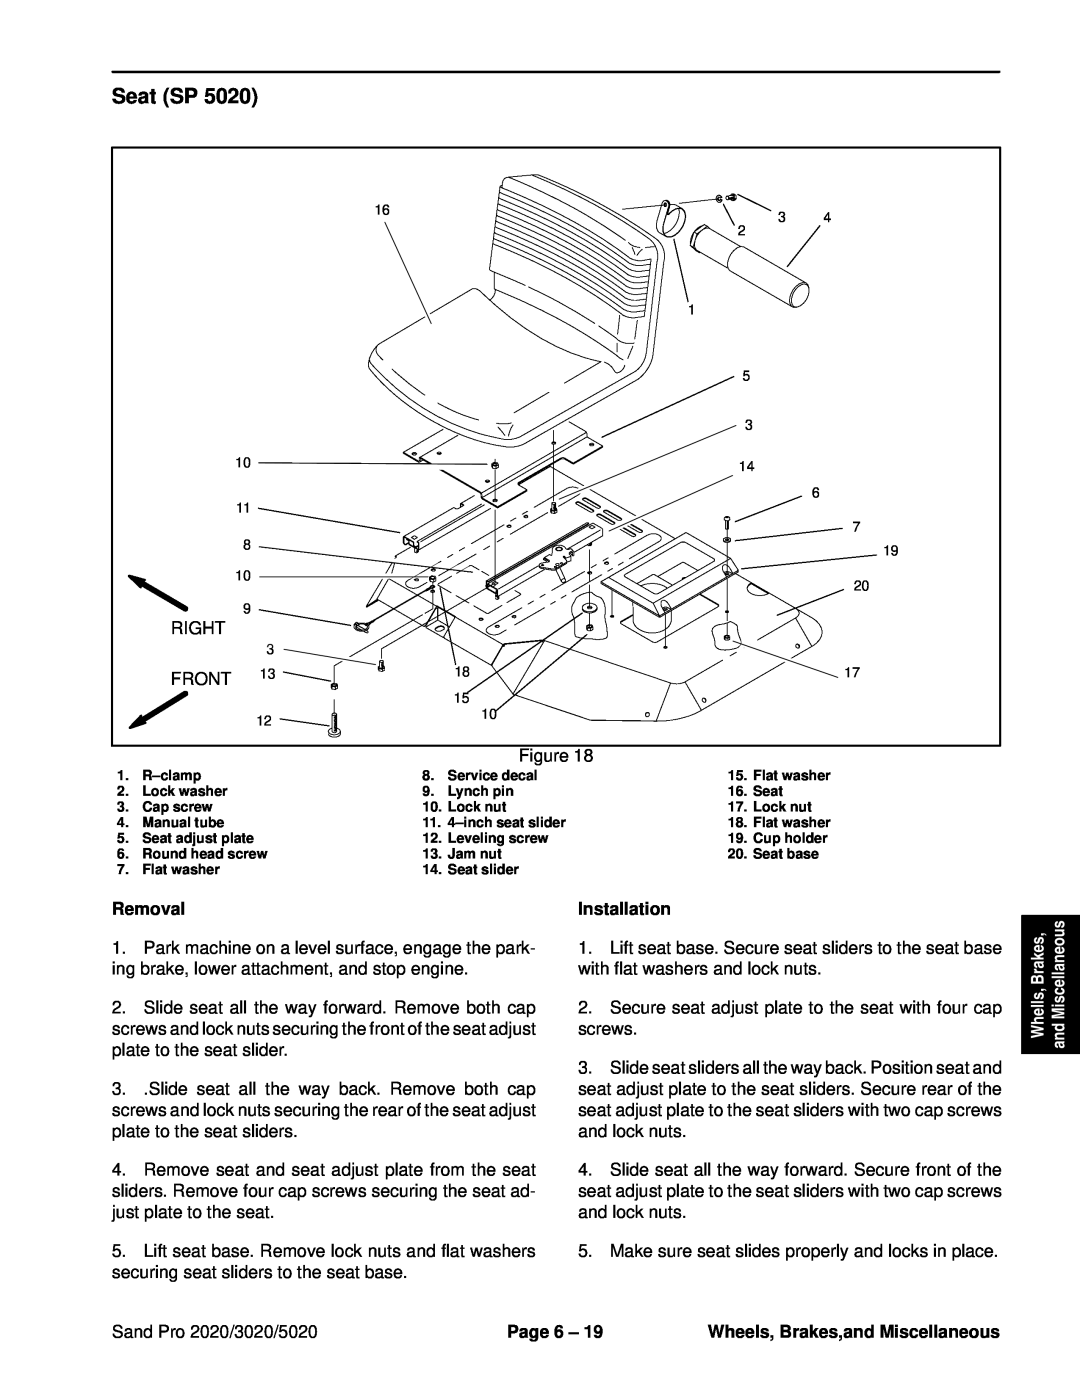 Toro service manual Seat SP, Removal, Installation, Sand Pro 2020/3020/5020, Page 6, Wheels, Brakes,and Miscellaneous 